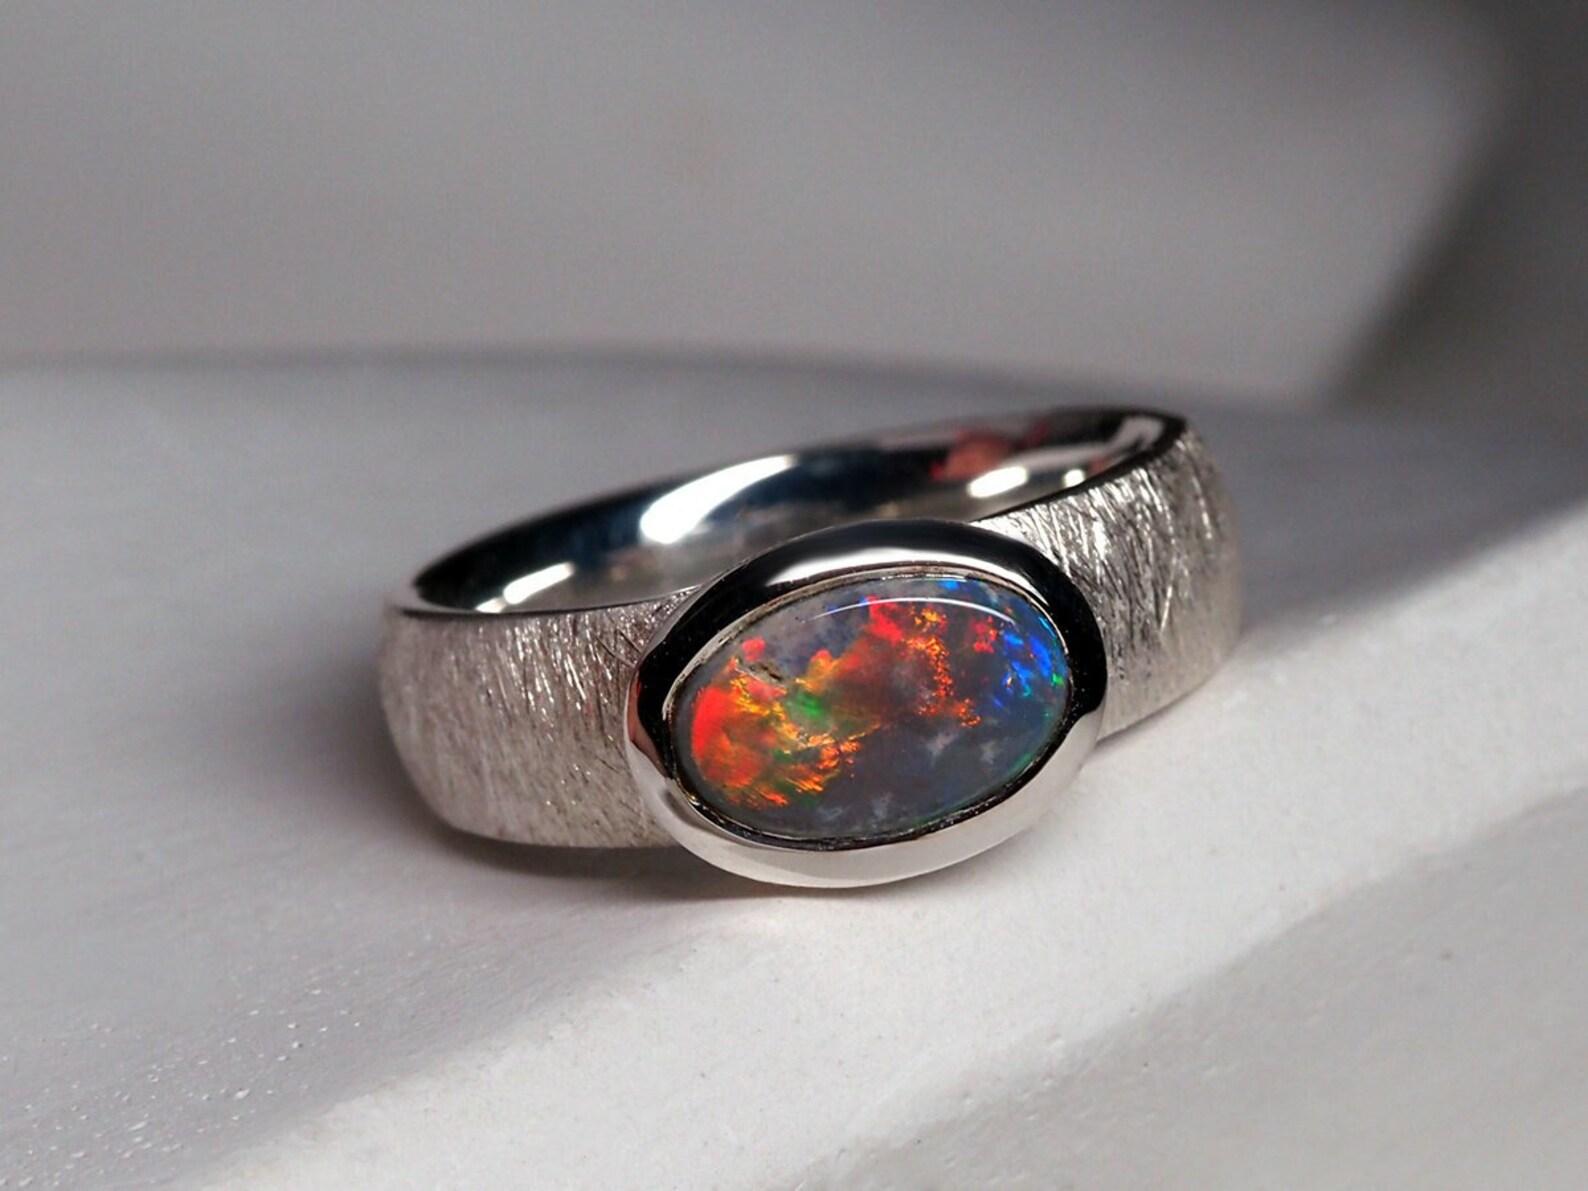 Silver ring with natural bright Black Opal
opal origin - Australia
opal measurements - 0.24 x 0.35 in / 6 x 9 mm
opal weight - 0.72 carats
ring size - 5.5 US
ring weight - 4.93 grams